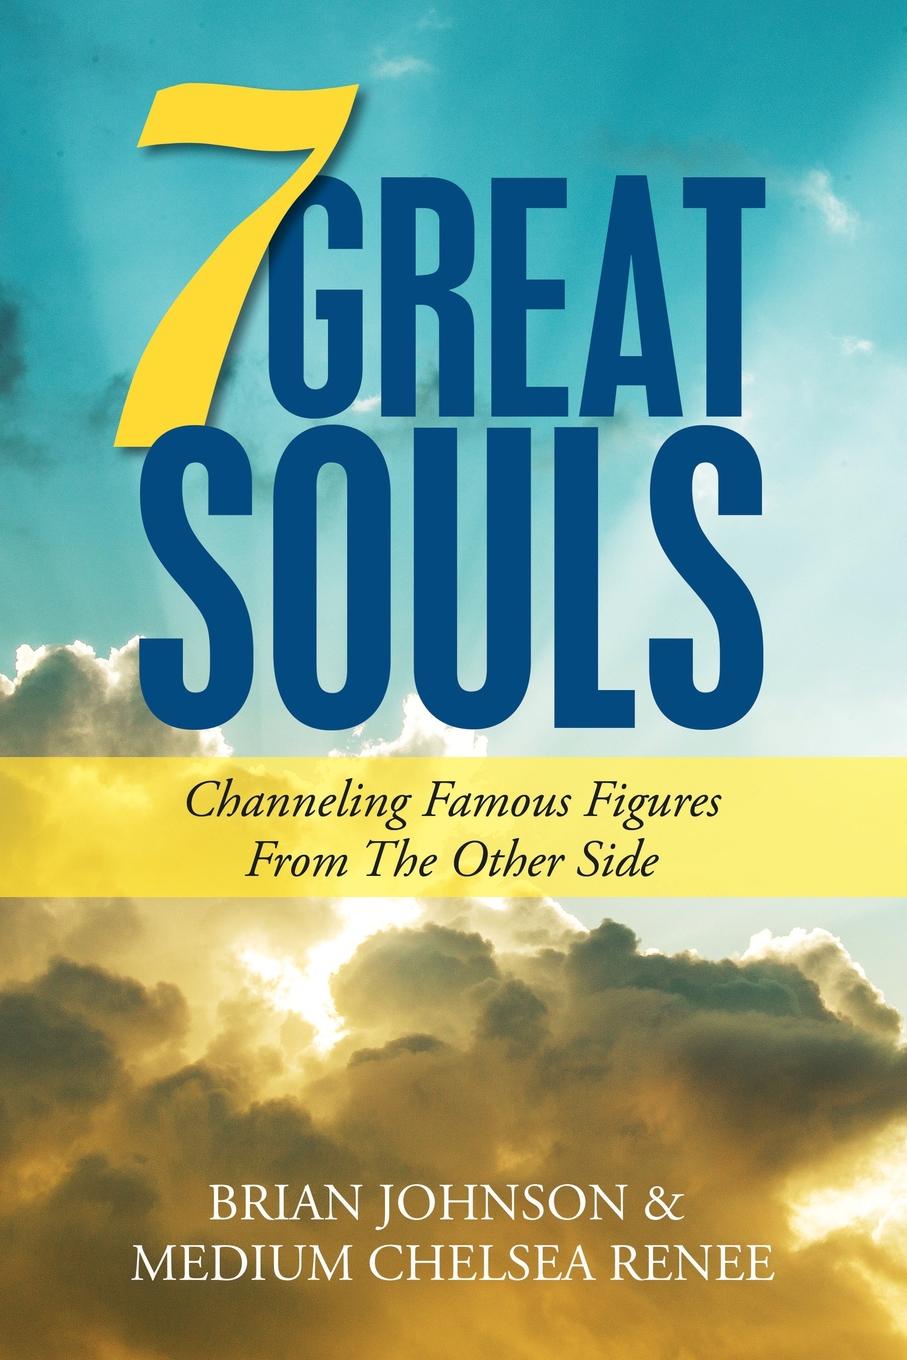 7 Great Souls. Channeling Famous Figures from the Other Side